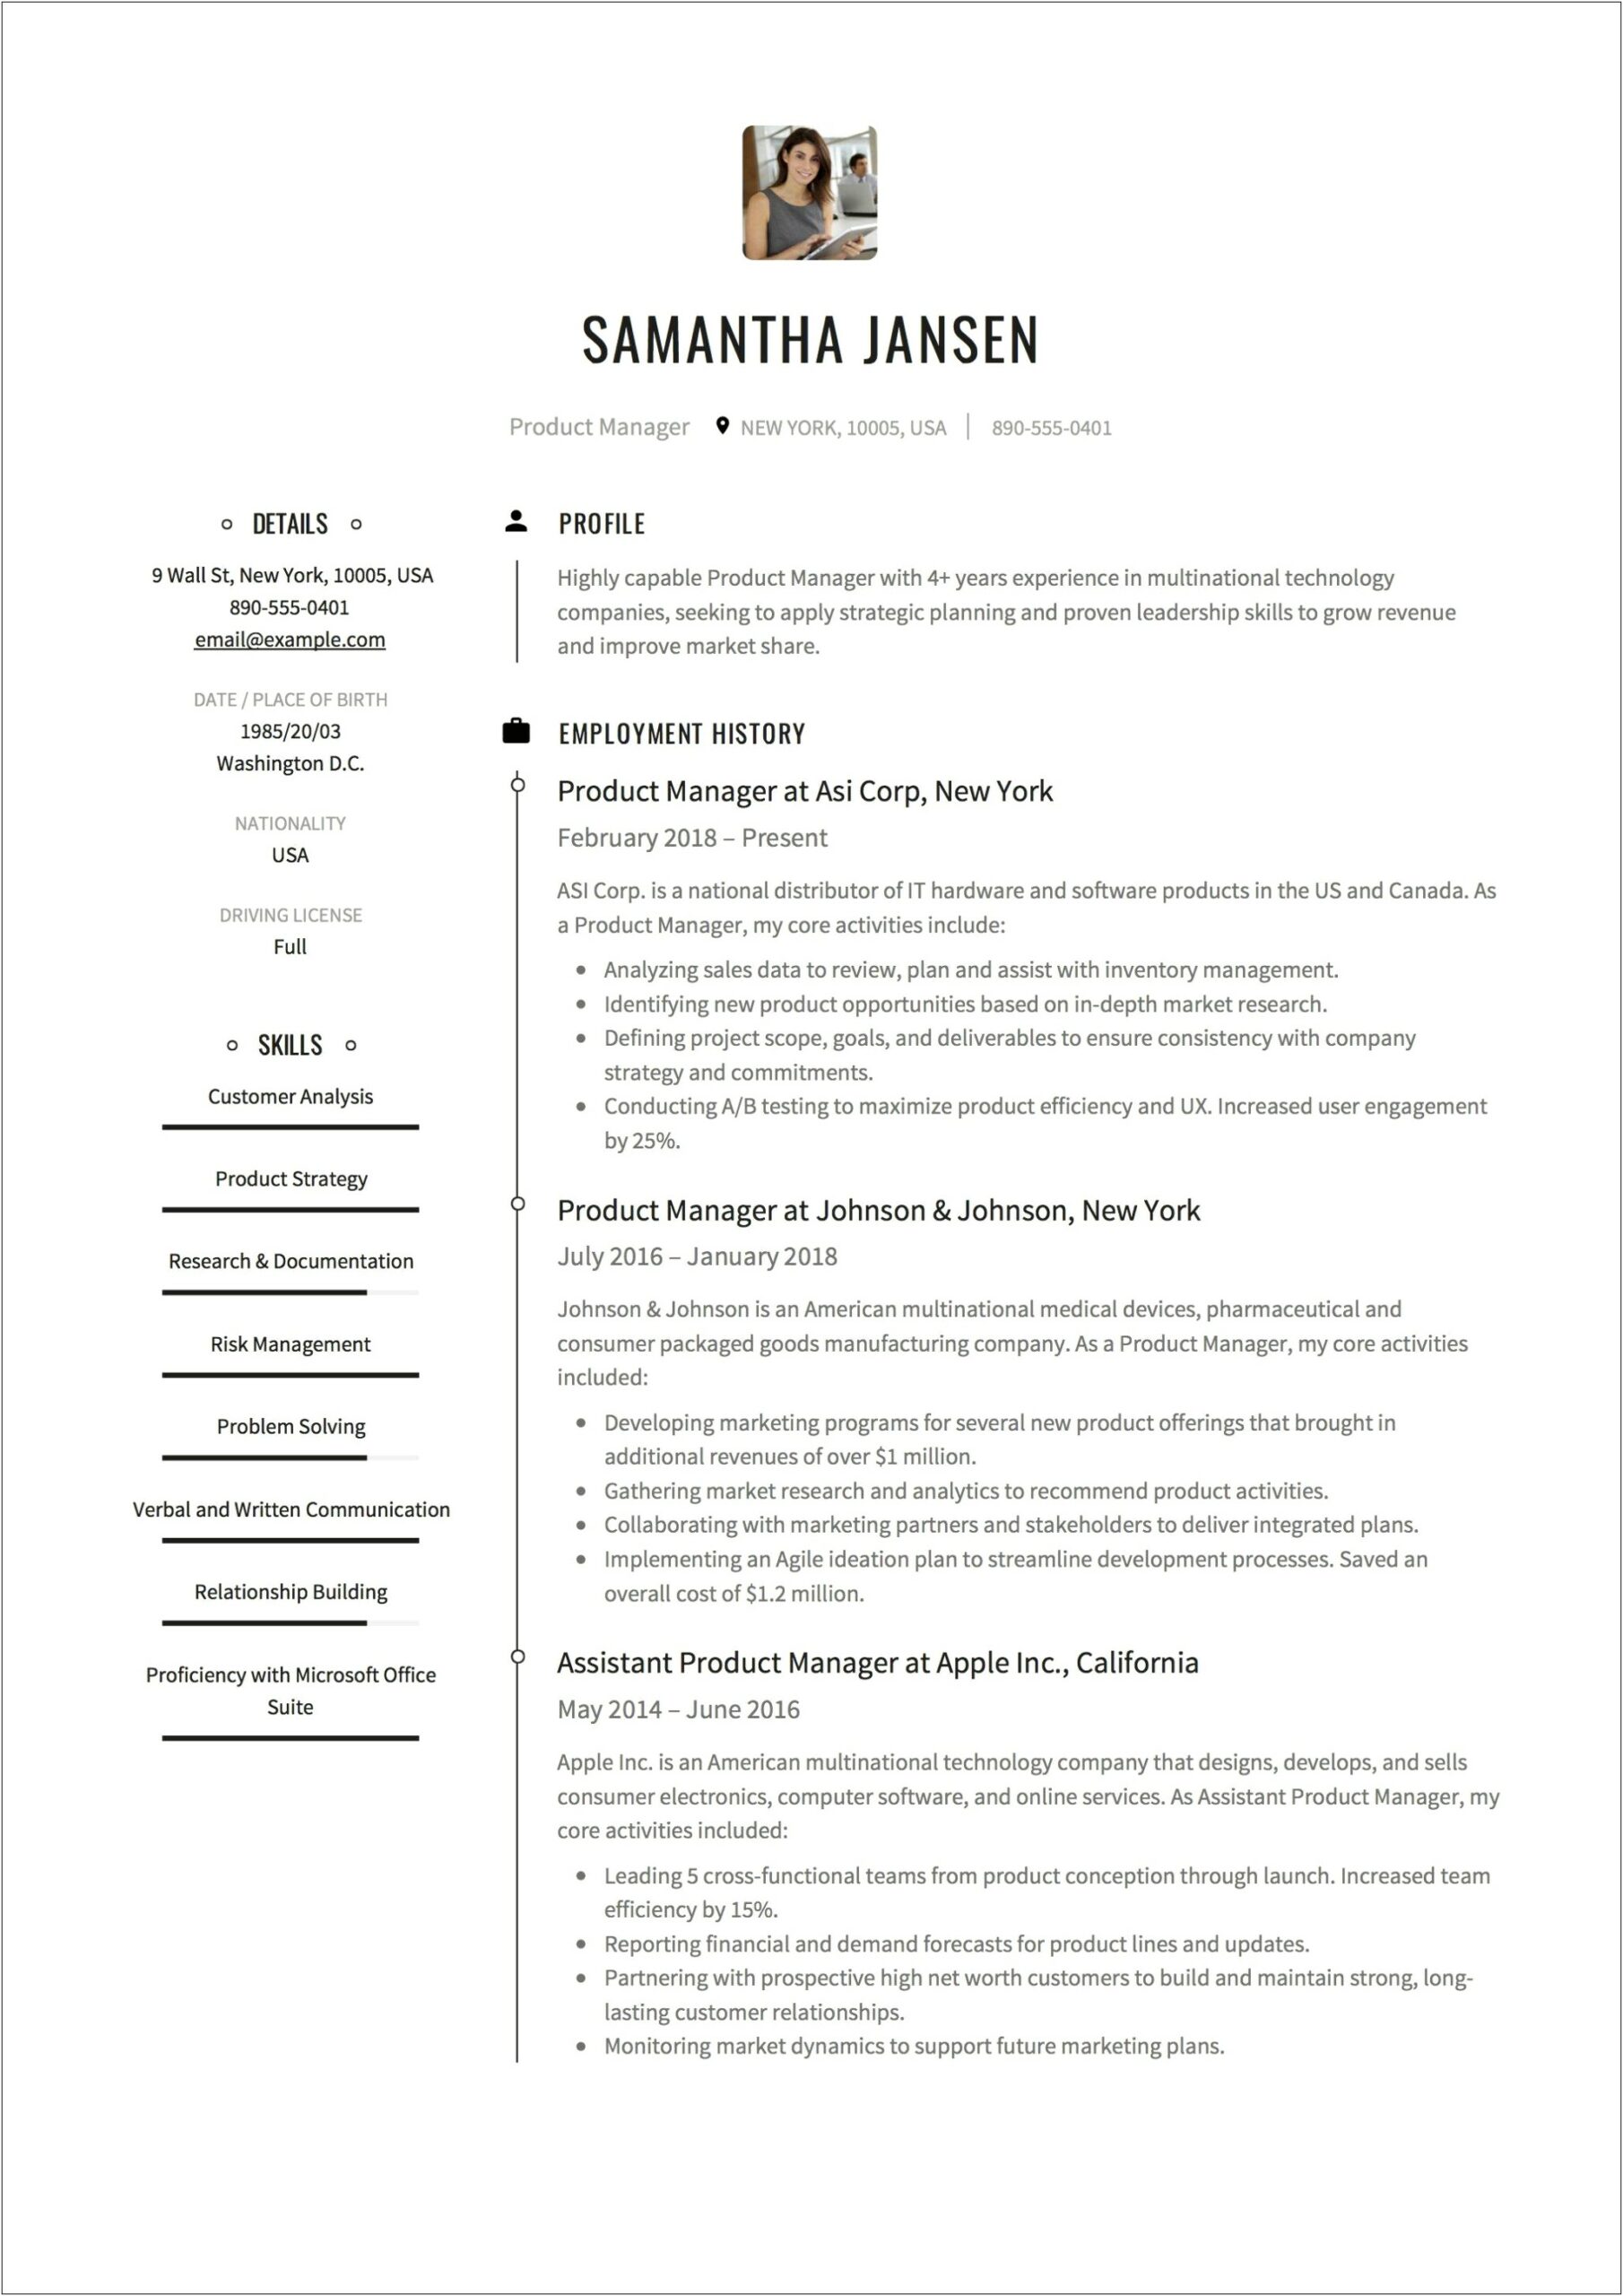 Product Manager Technical Skills Put On Resume